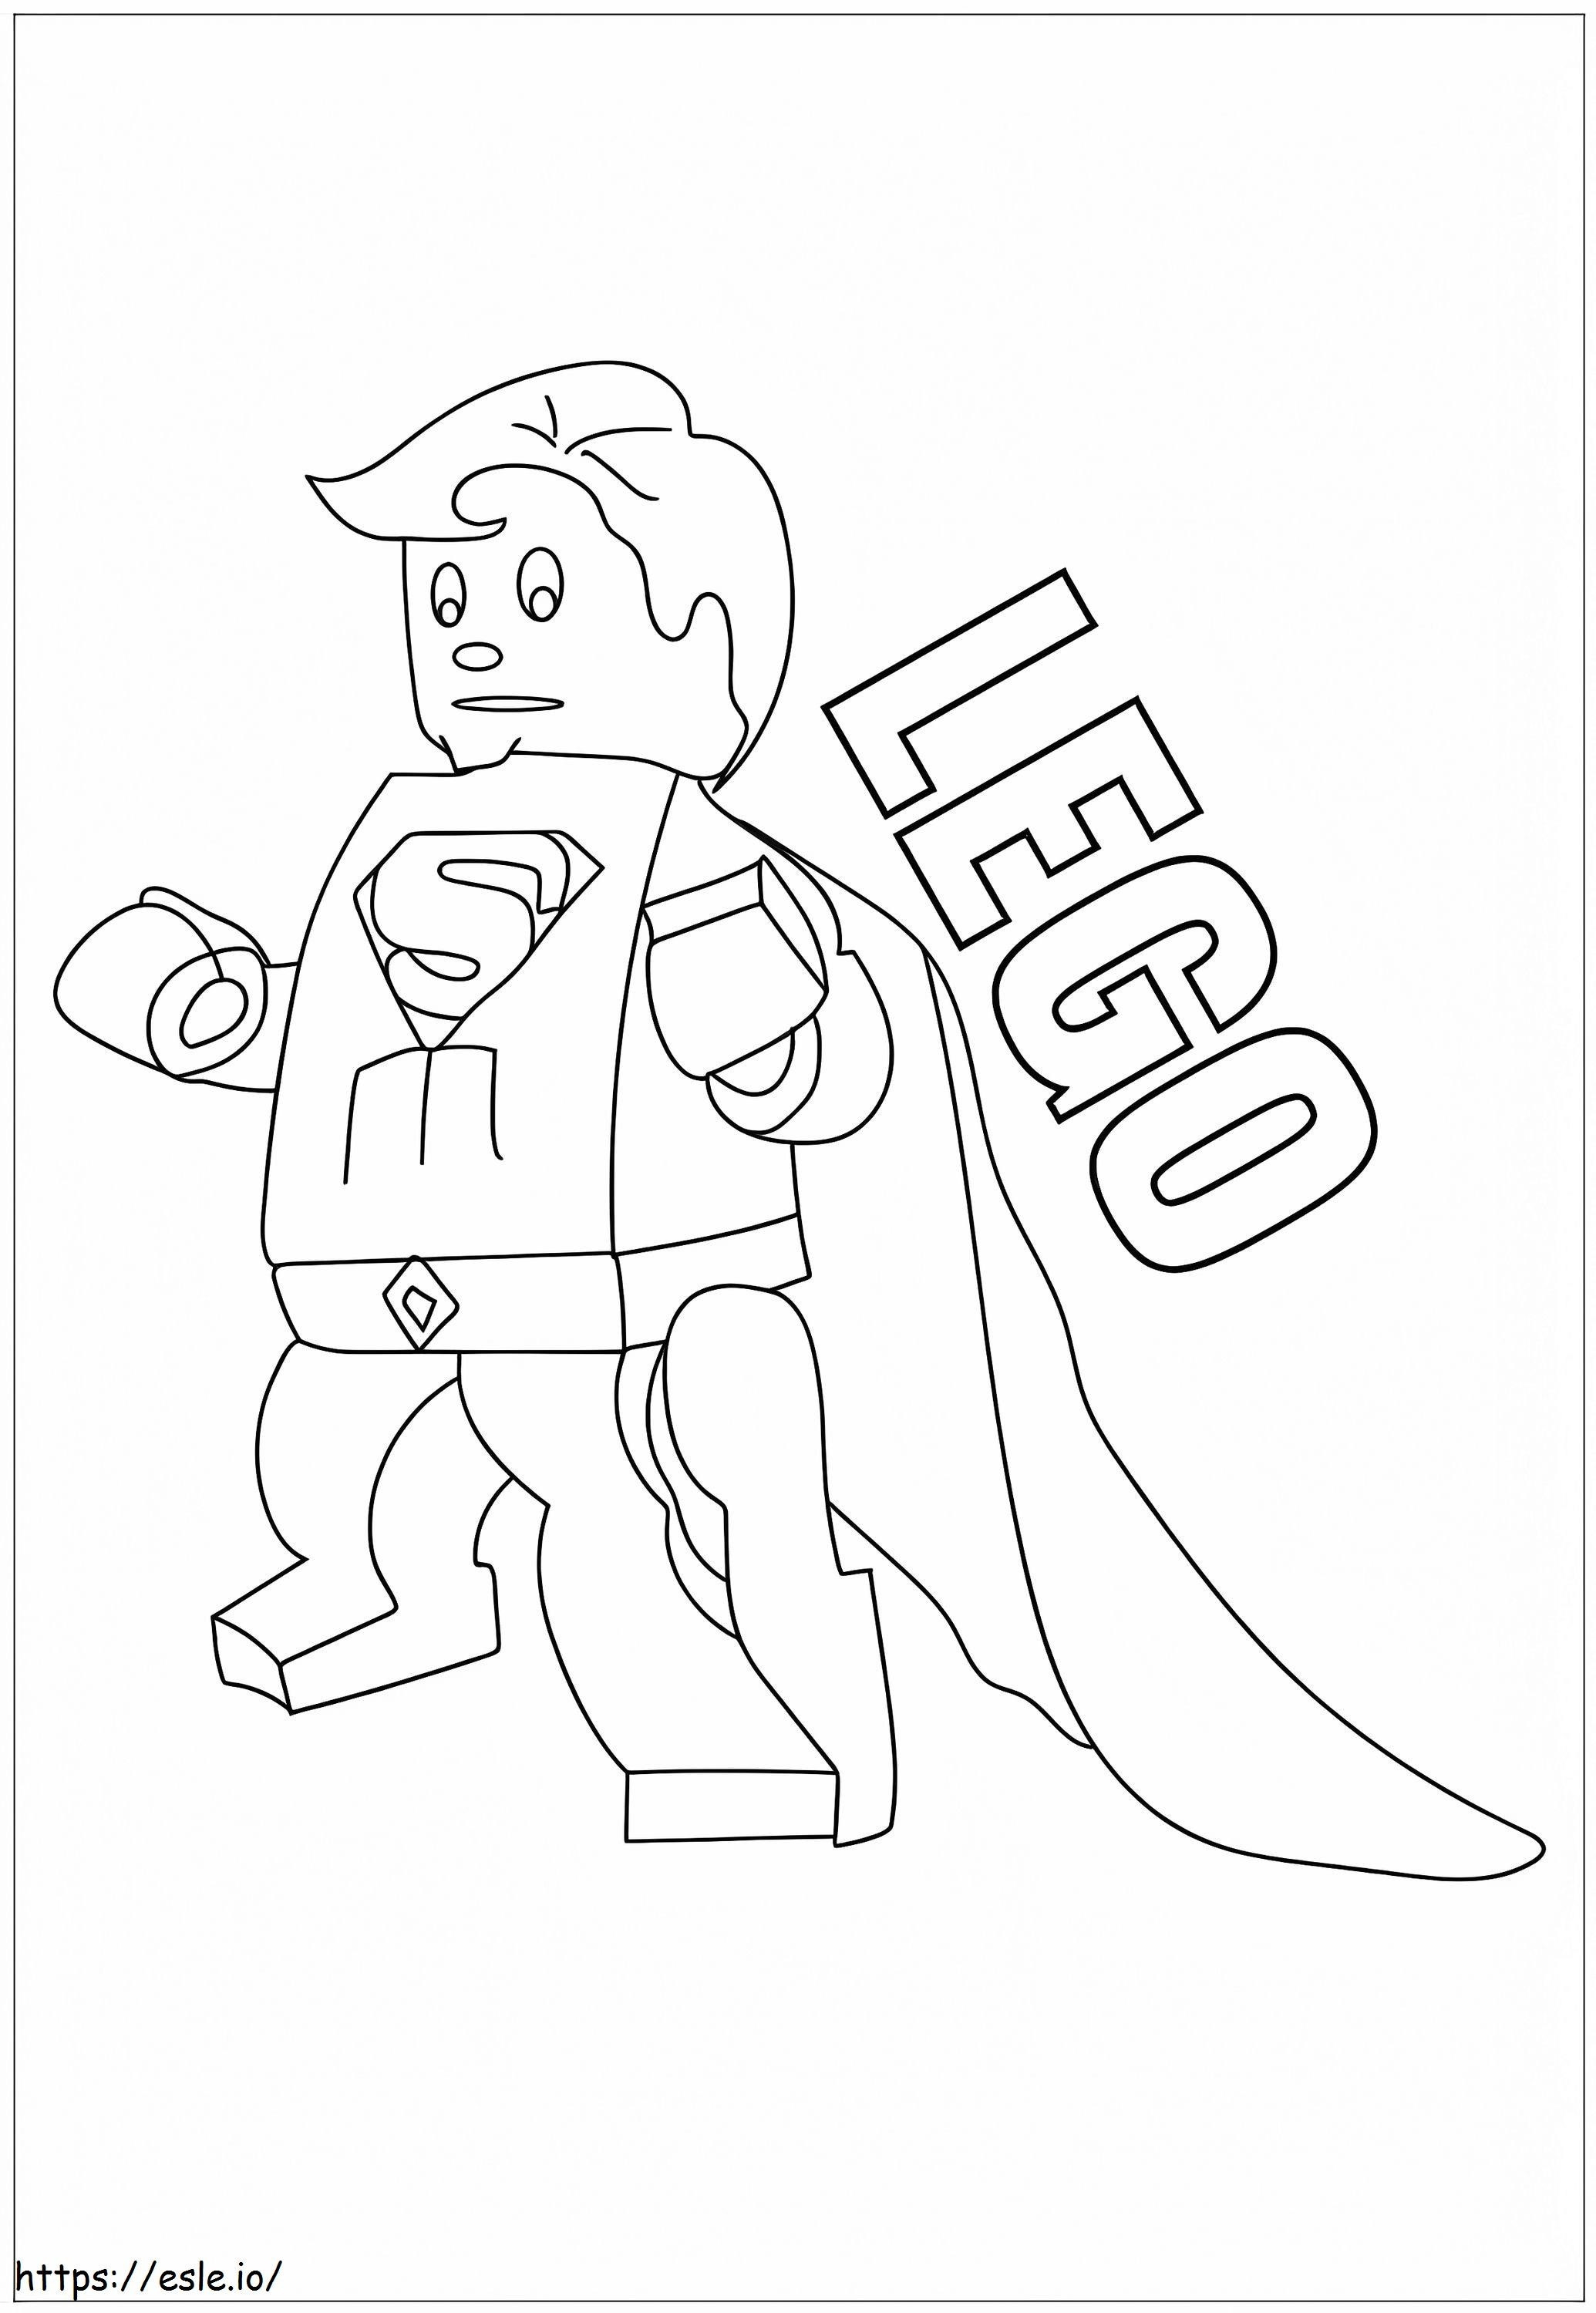 Funny Lego Superman coloring page